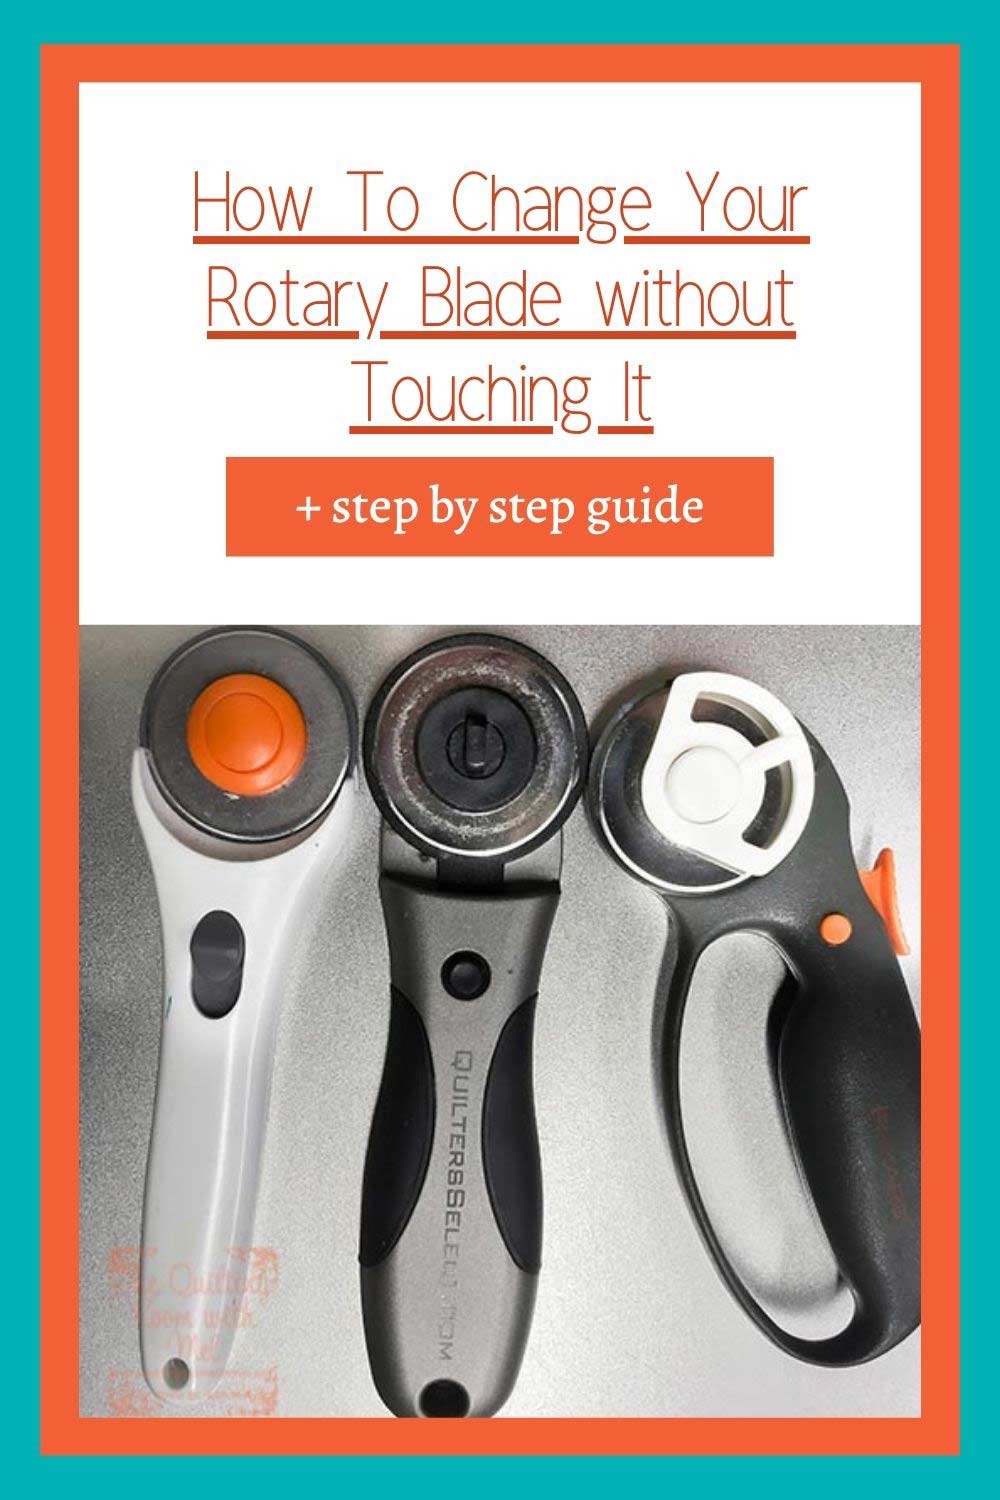 Learn how to change your rotary cutter blade without ever having to touch it- keeping your fingers safe in the process! Plus, find out where to buy quality rotary blades and what to do with them once you've changed them.